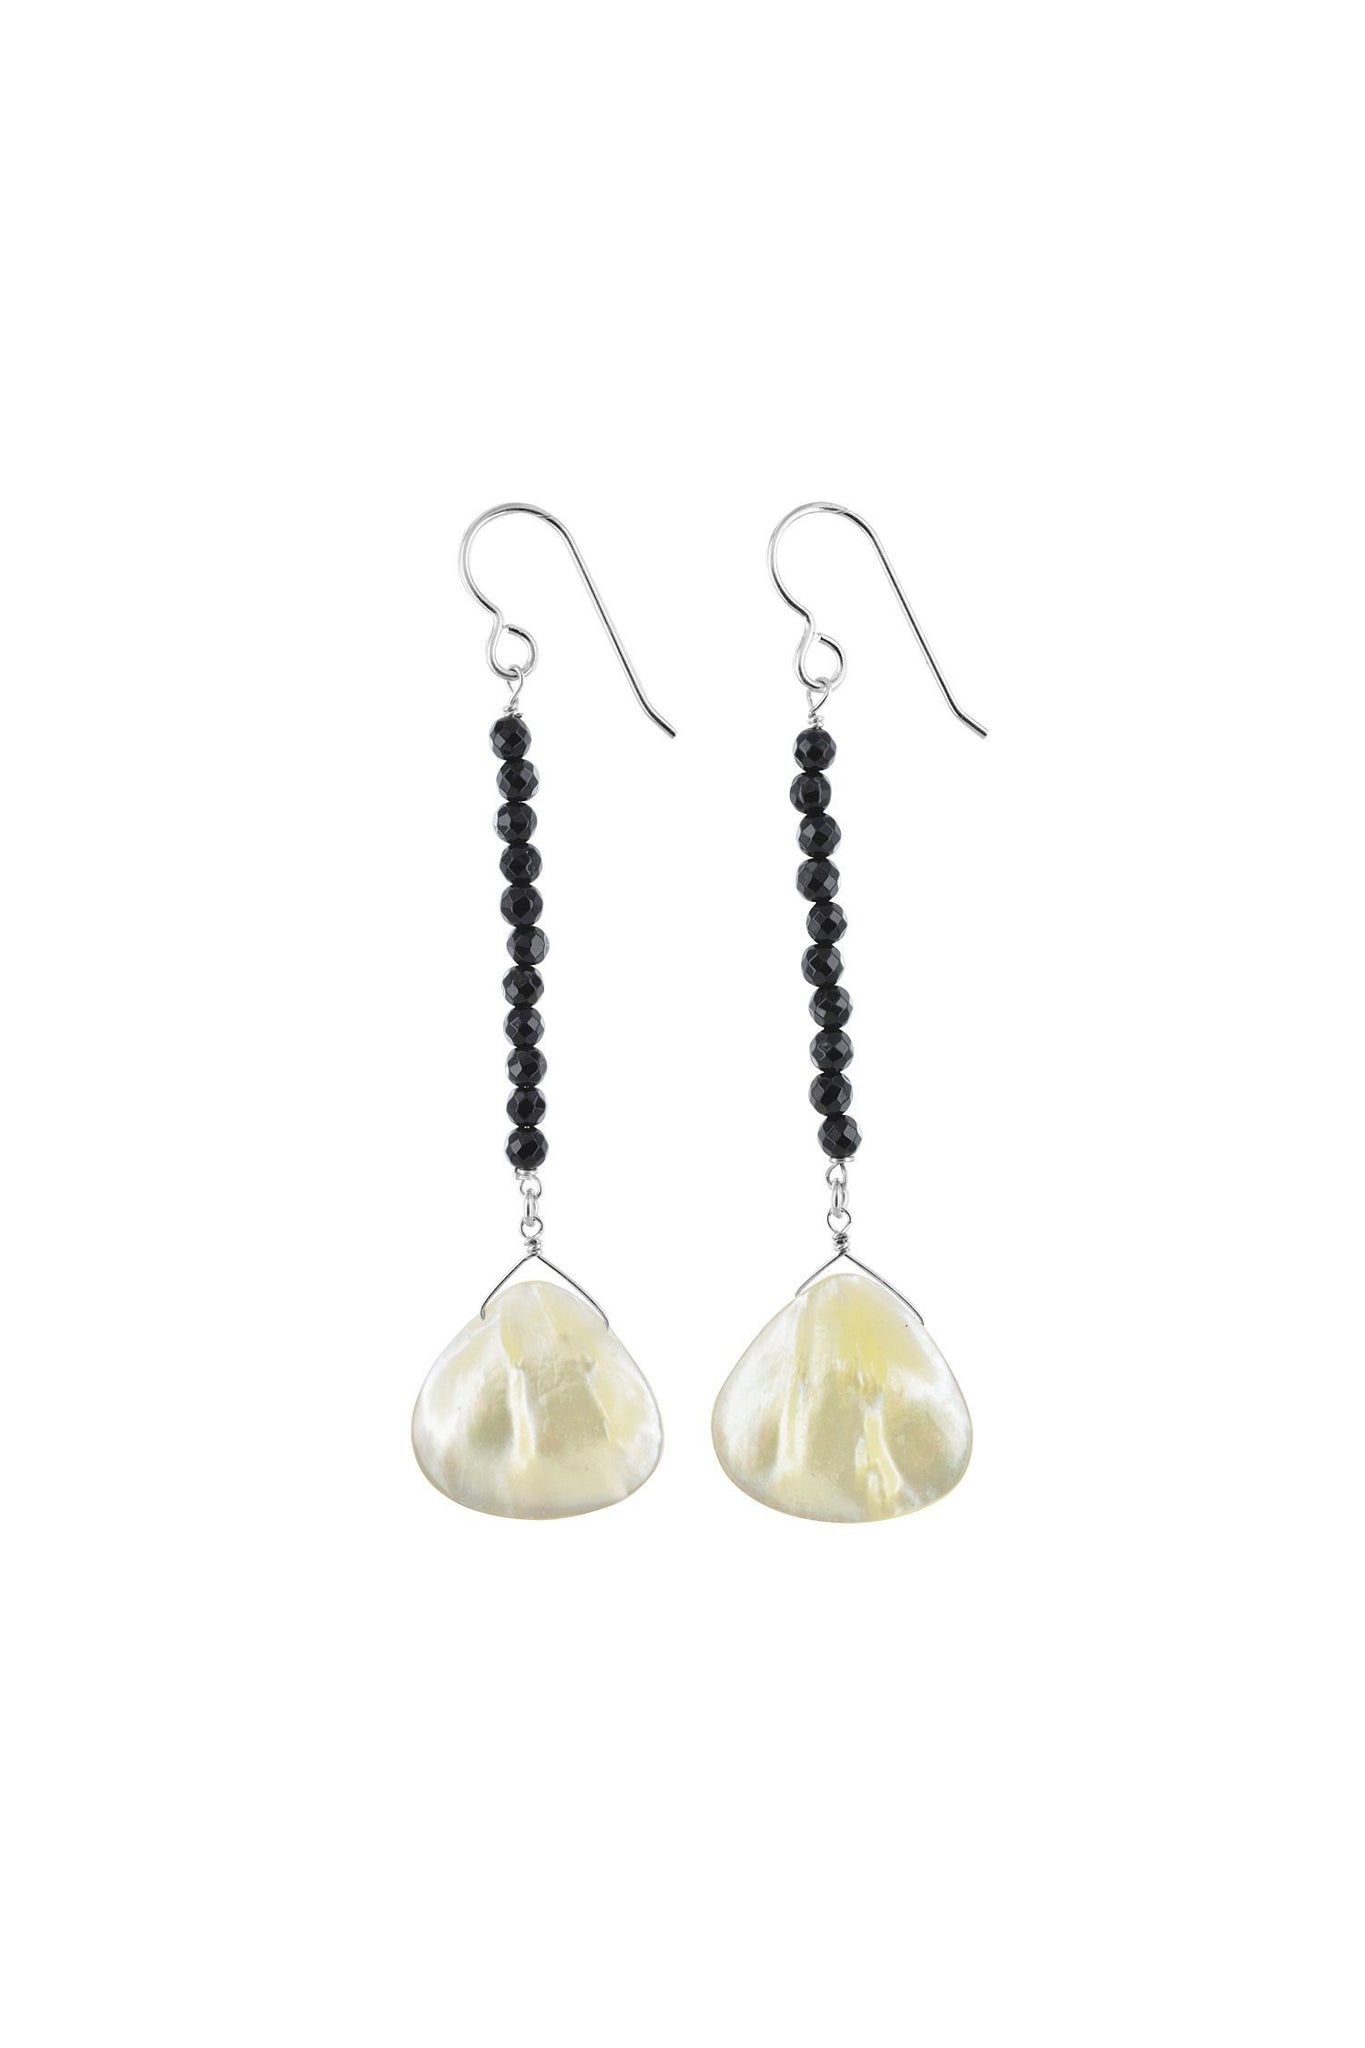 Long Black and White Earrings, Mother of Pearl, Onyx